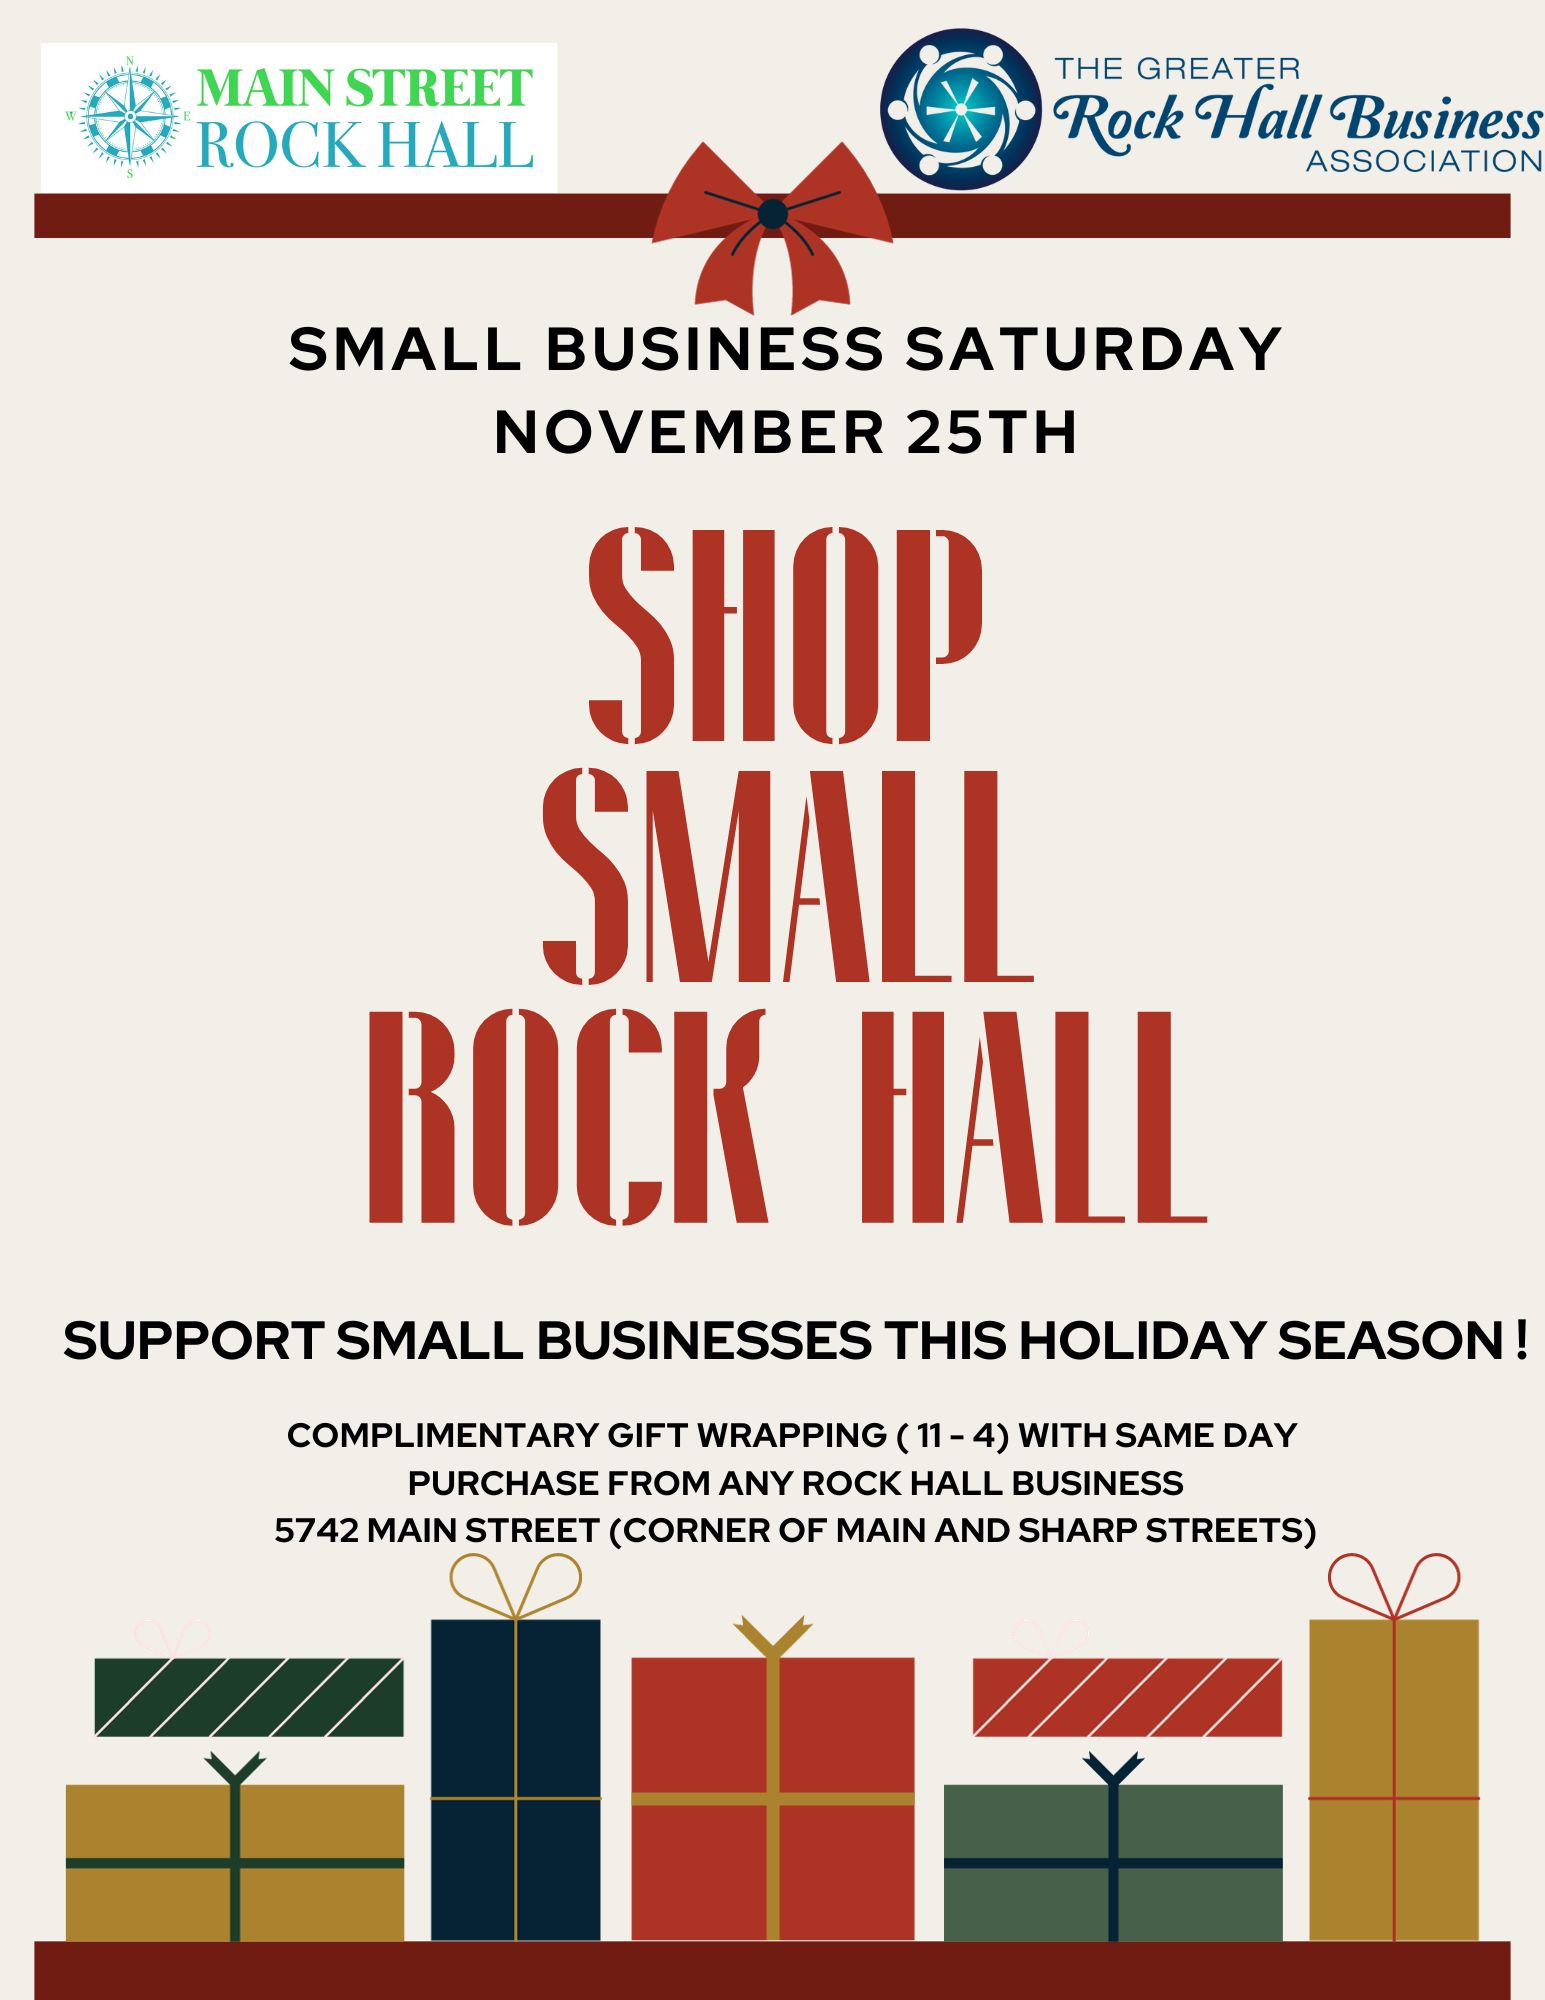 SHOP SMALL ROCK HALL FOR THE HOLIDAYS!